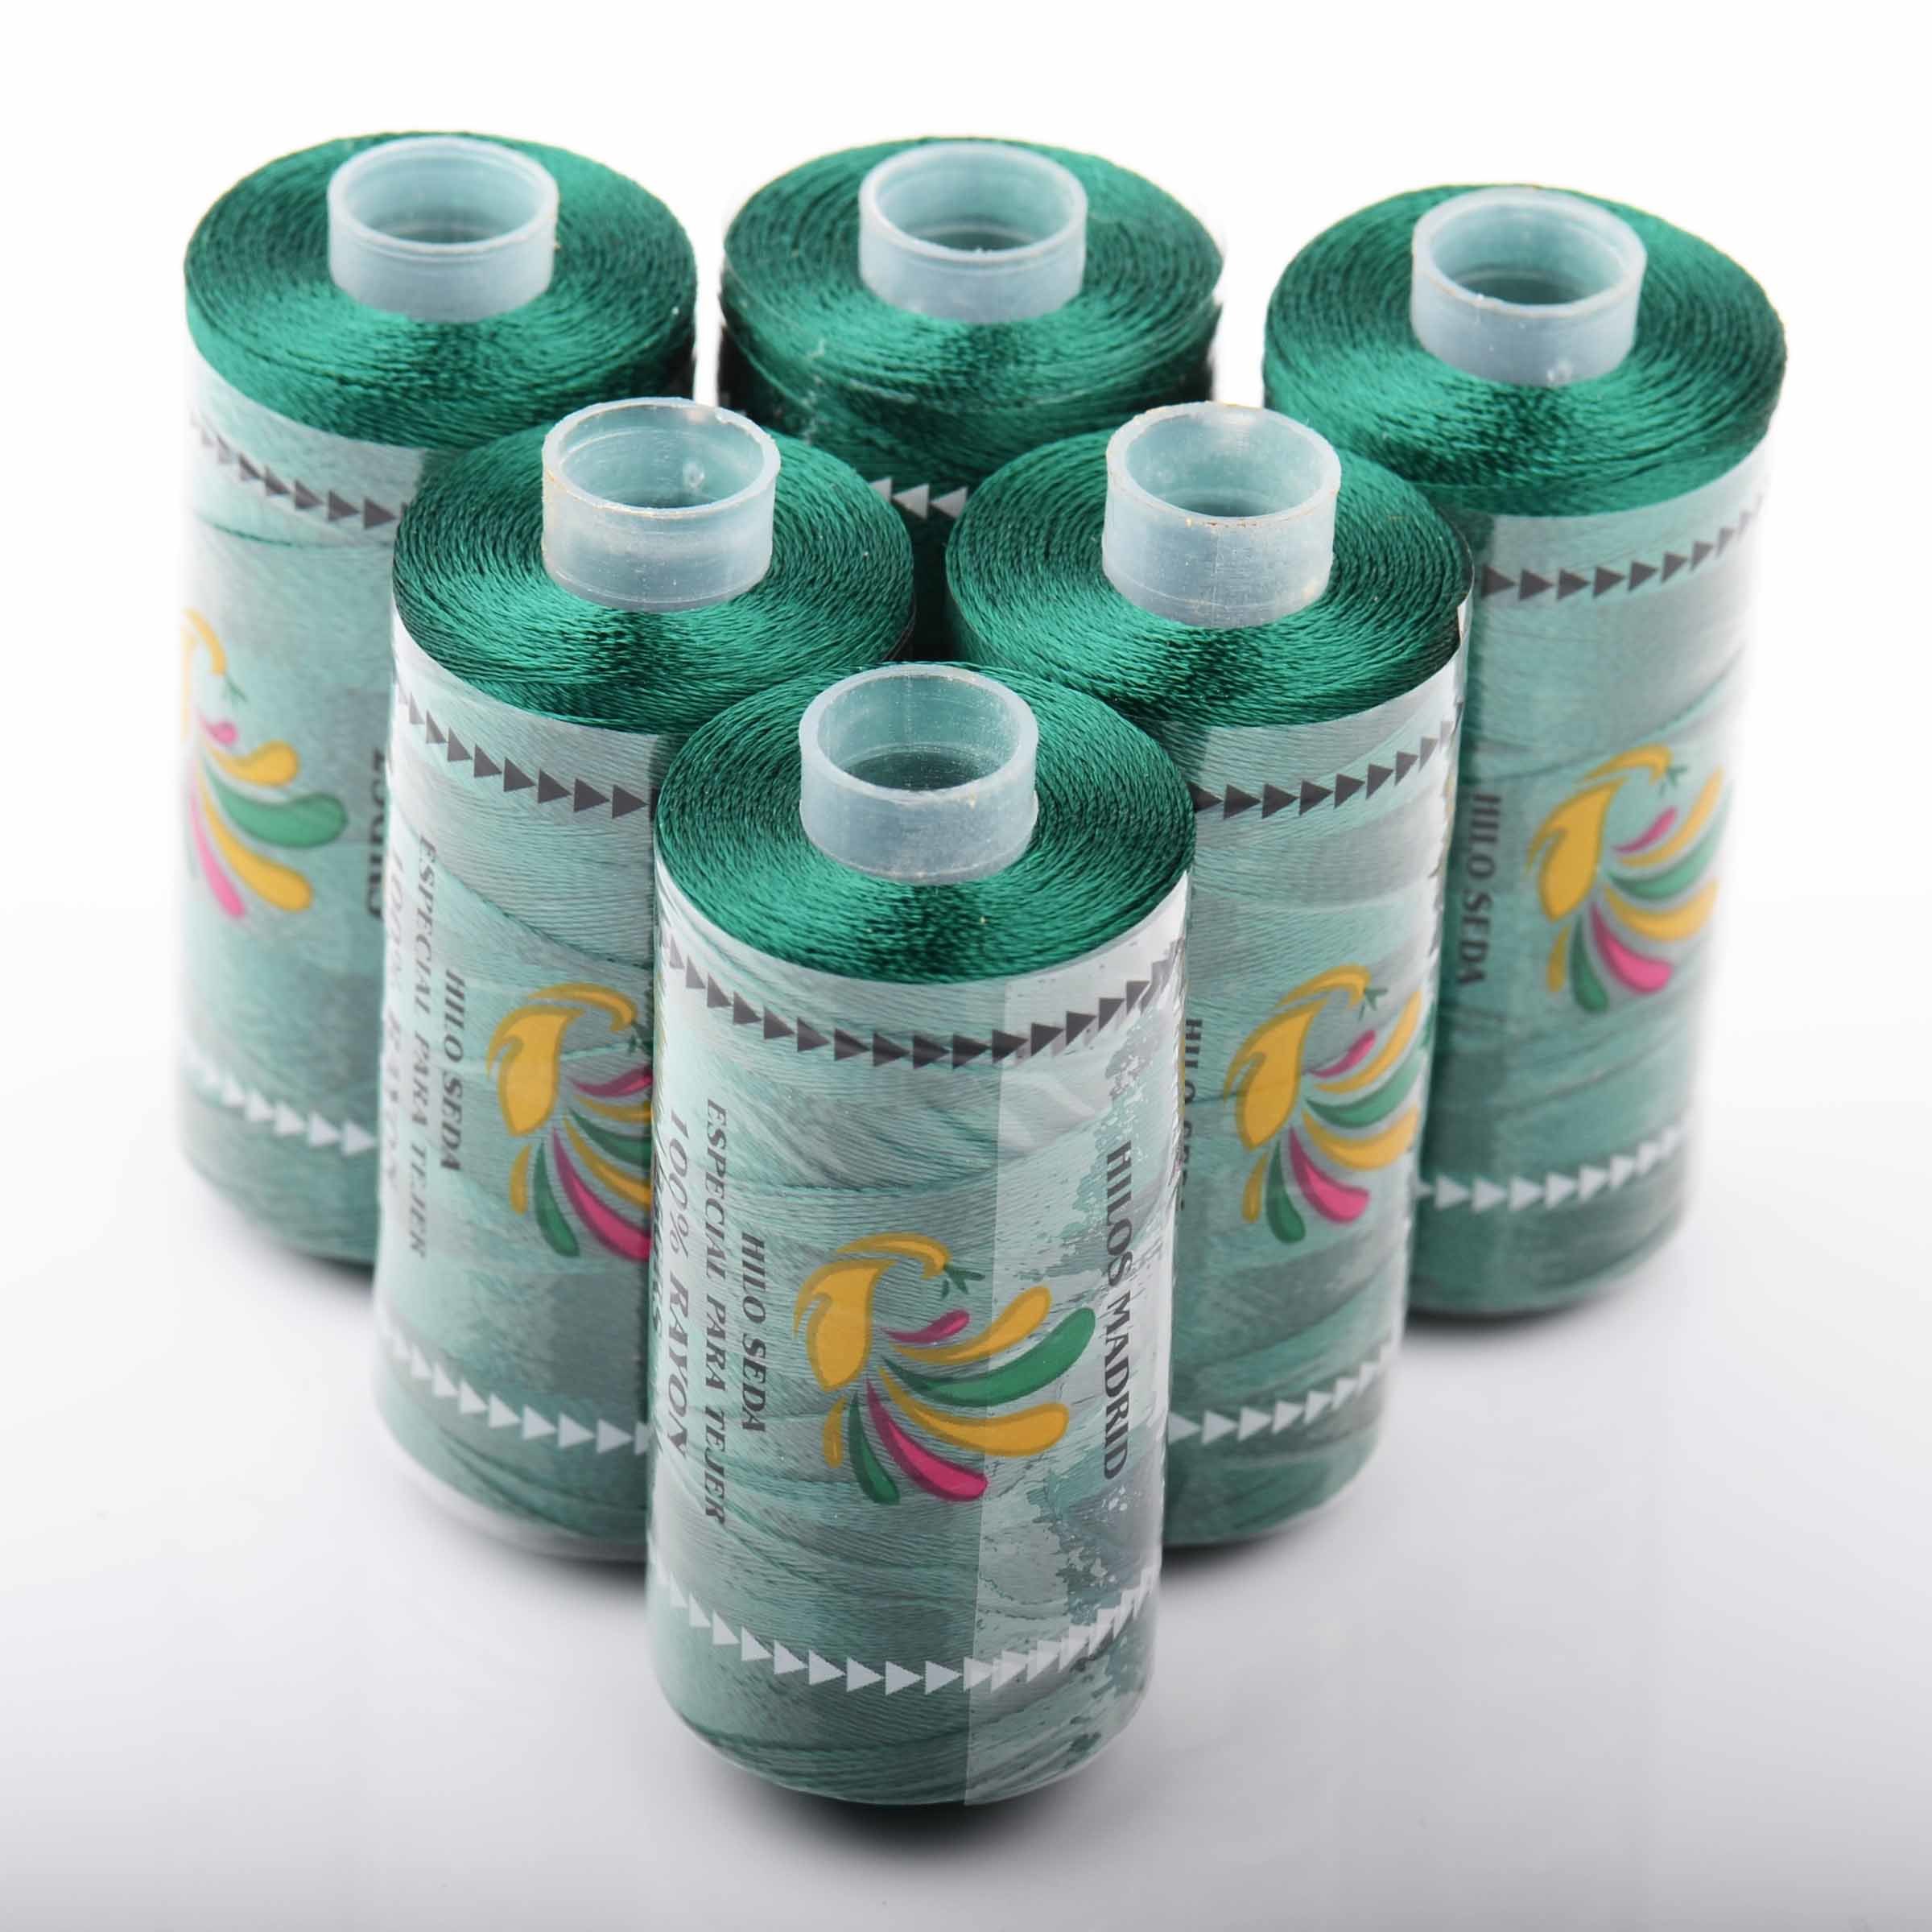 Brand New China Manufacturer Hilos Madrid 100% Rayon Viscose Embroidery Silk Thread Machine Embroidery Thread